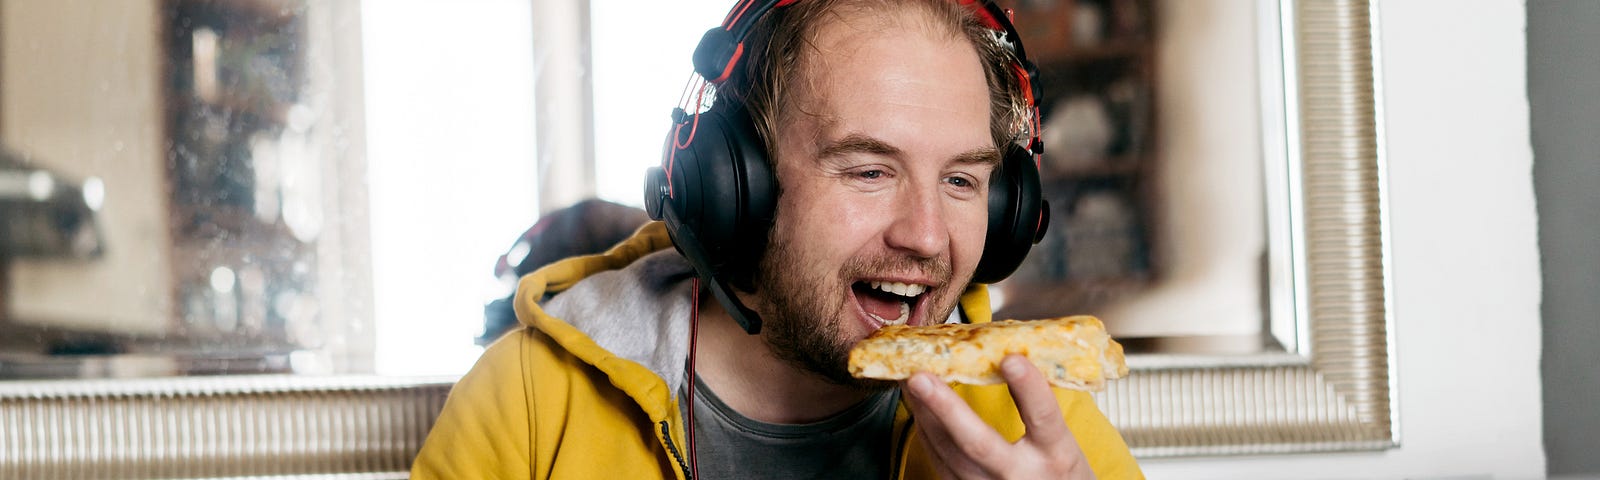 A photo of a man eating pizza and laughing while on a video call.